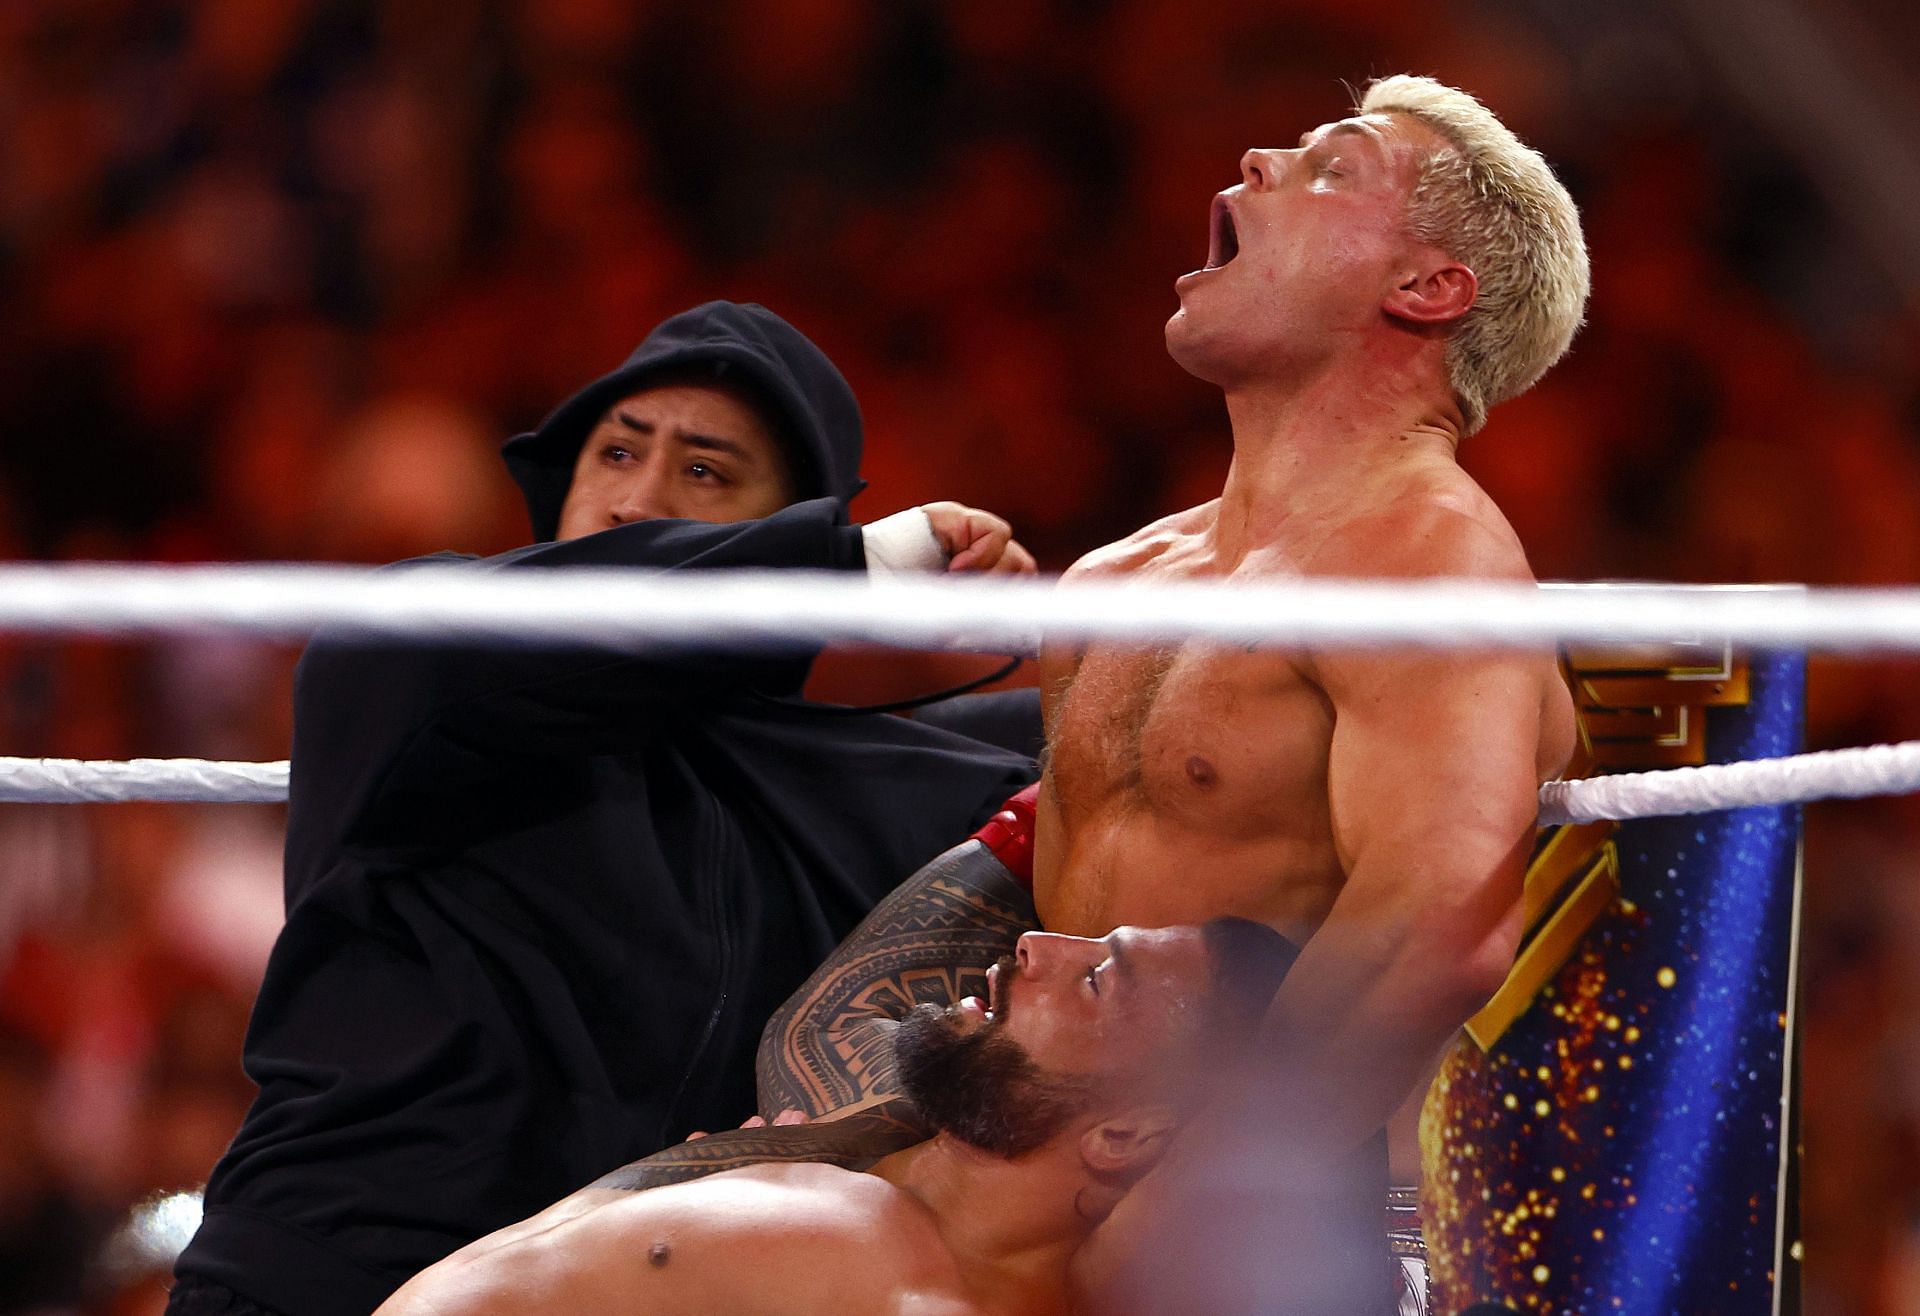 Solo helped Roman retain his titles at WrestleMania 39.